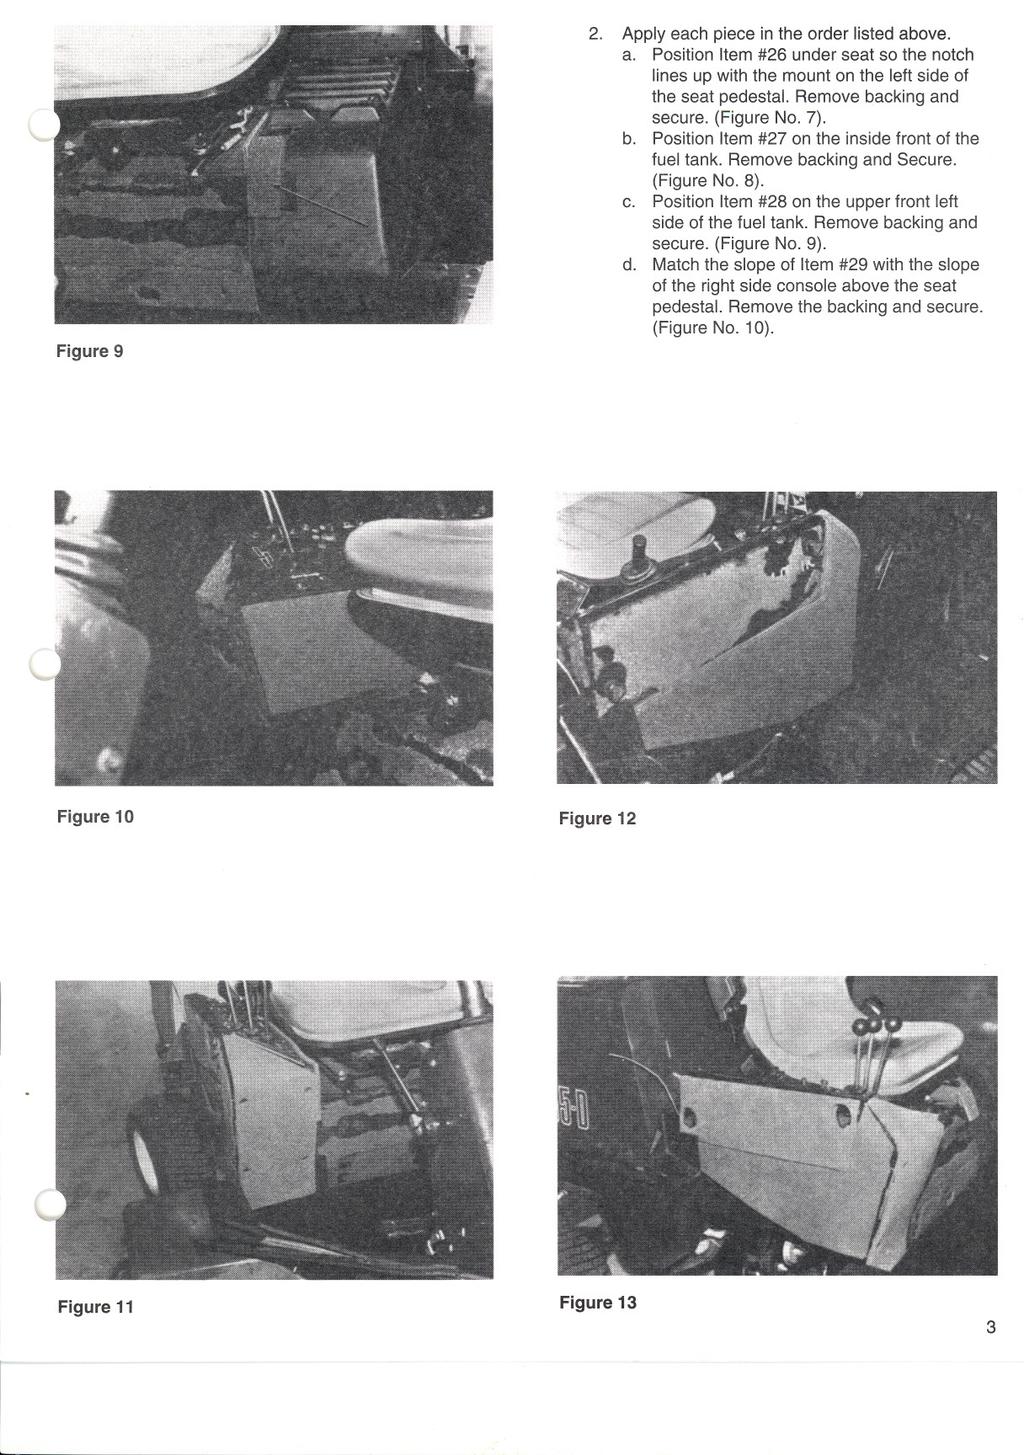 Figure 9. Apply each piece in the order listed above. a. Position Item #6 under seat so the notch lines up with the mount on the left side of the seat pedestal. Remove backing and secure. (Figure No.